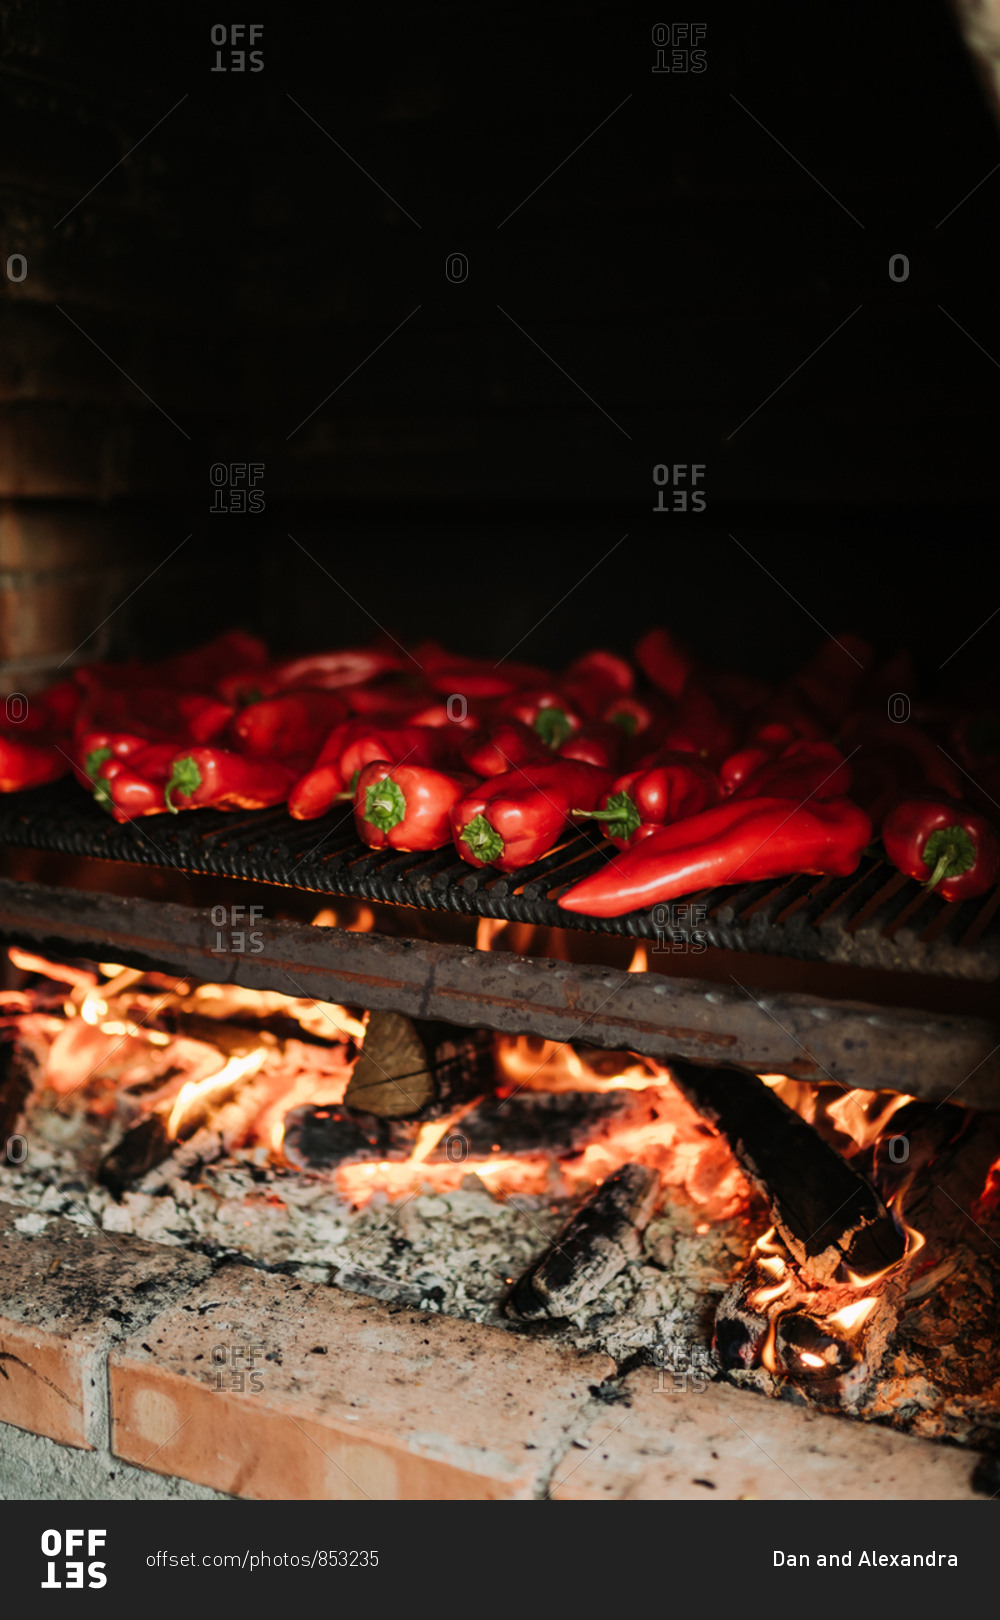 Red peppers cooking in a wood fire oven